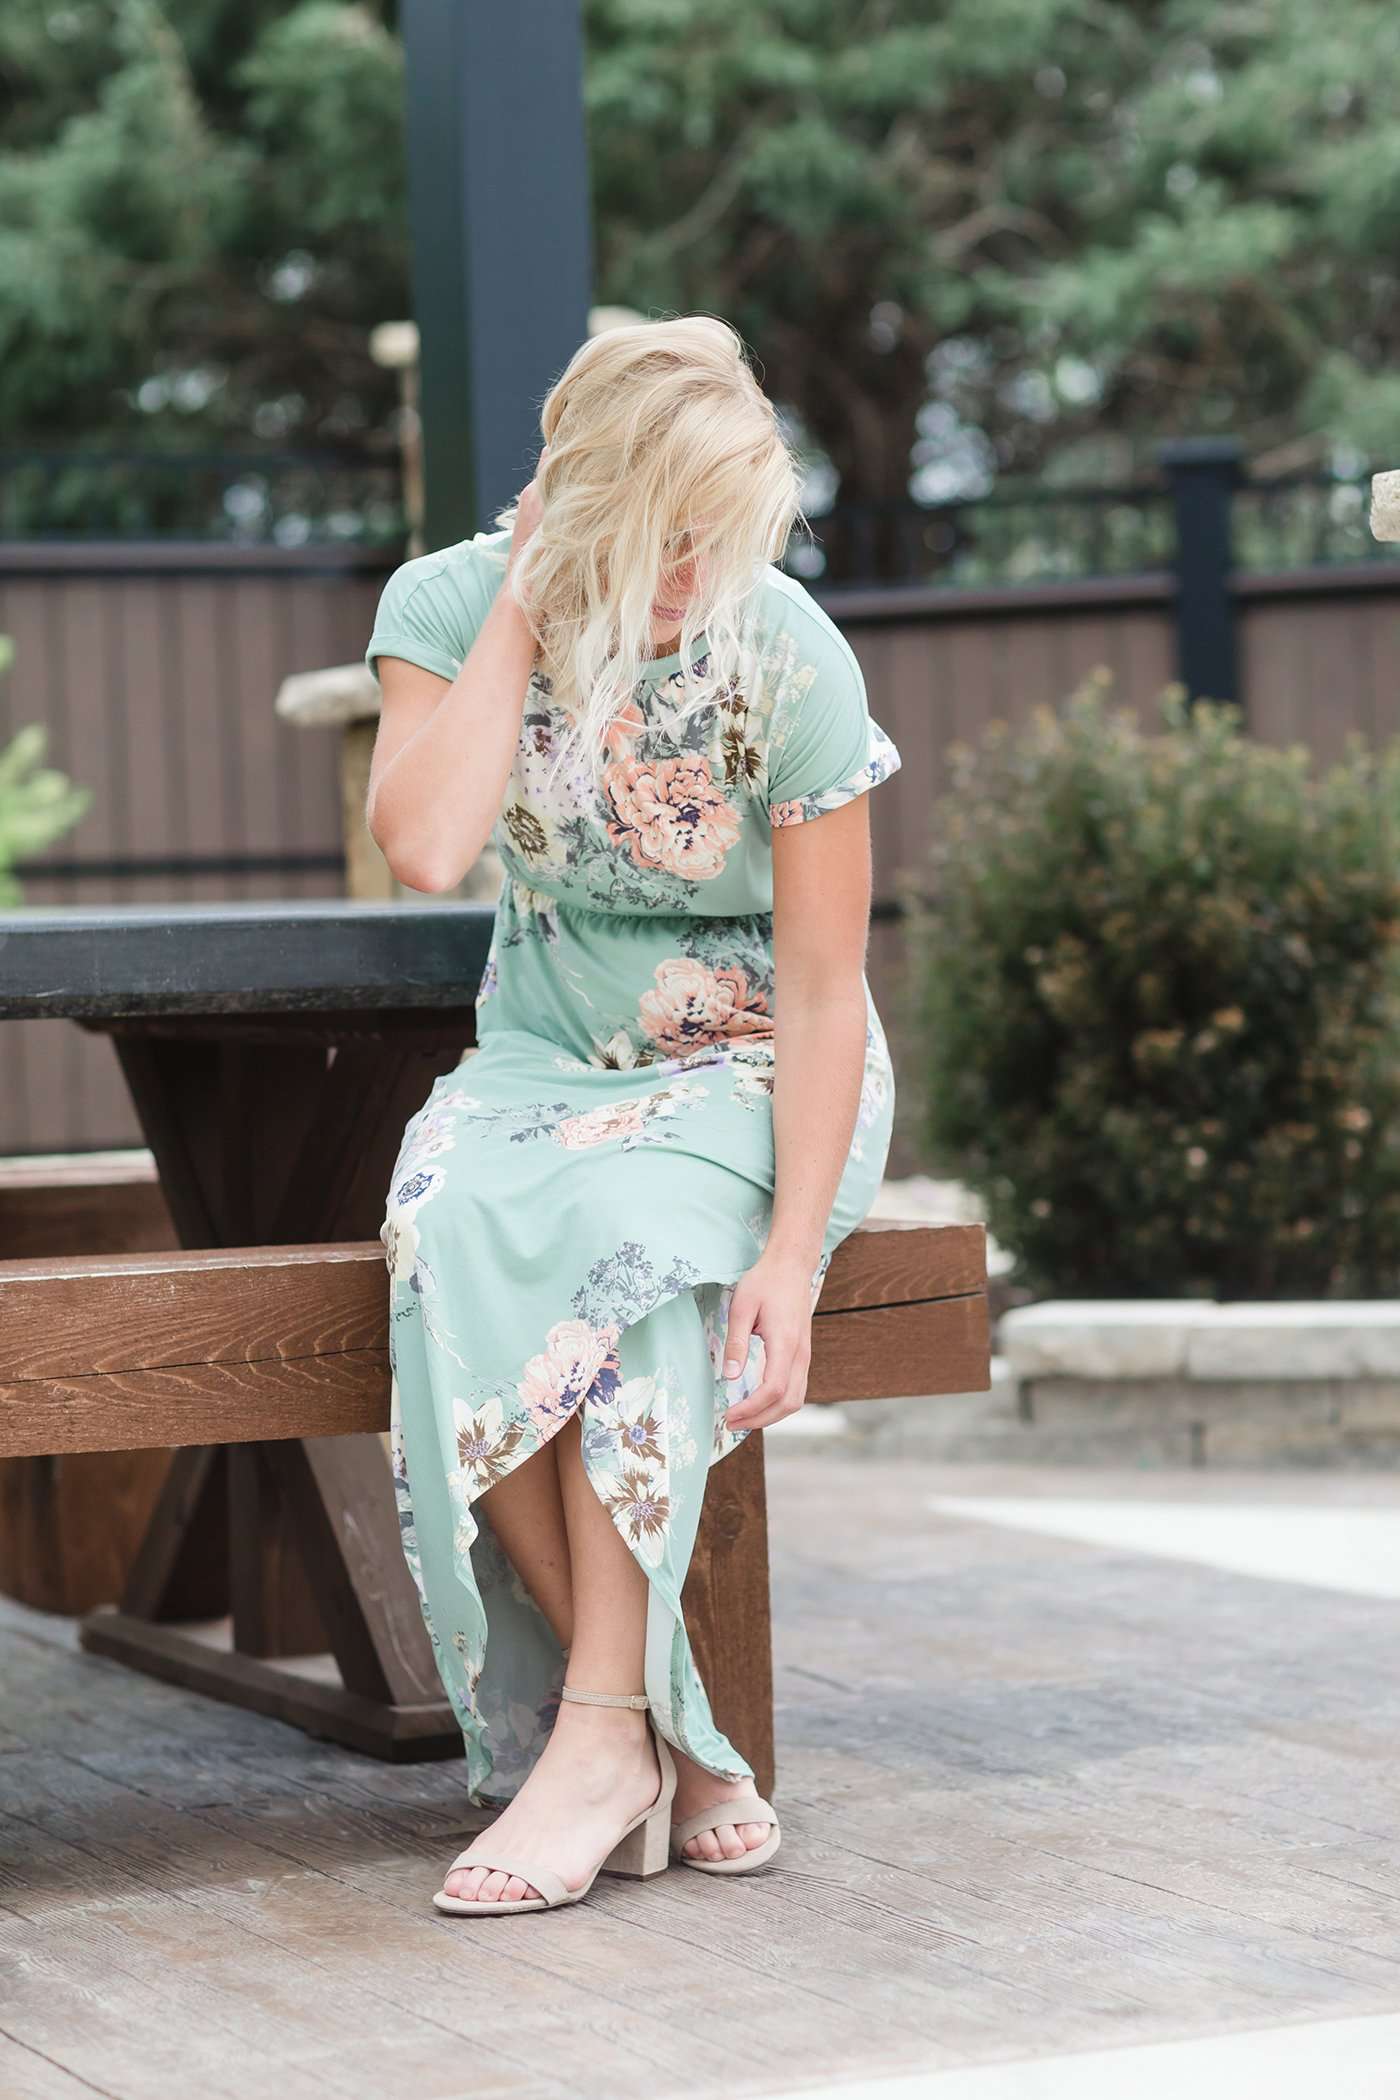 midi length floral dress with elastic waist that comes in blush, mint or navy florals.